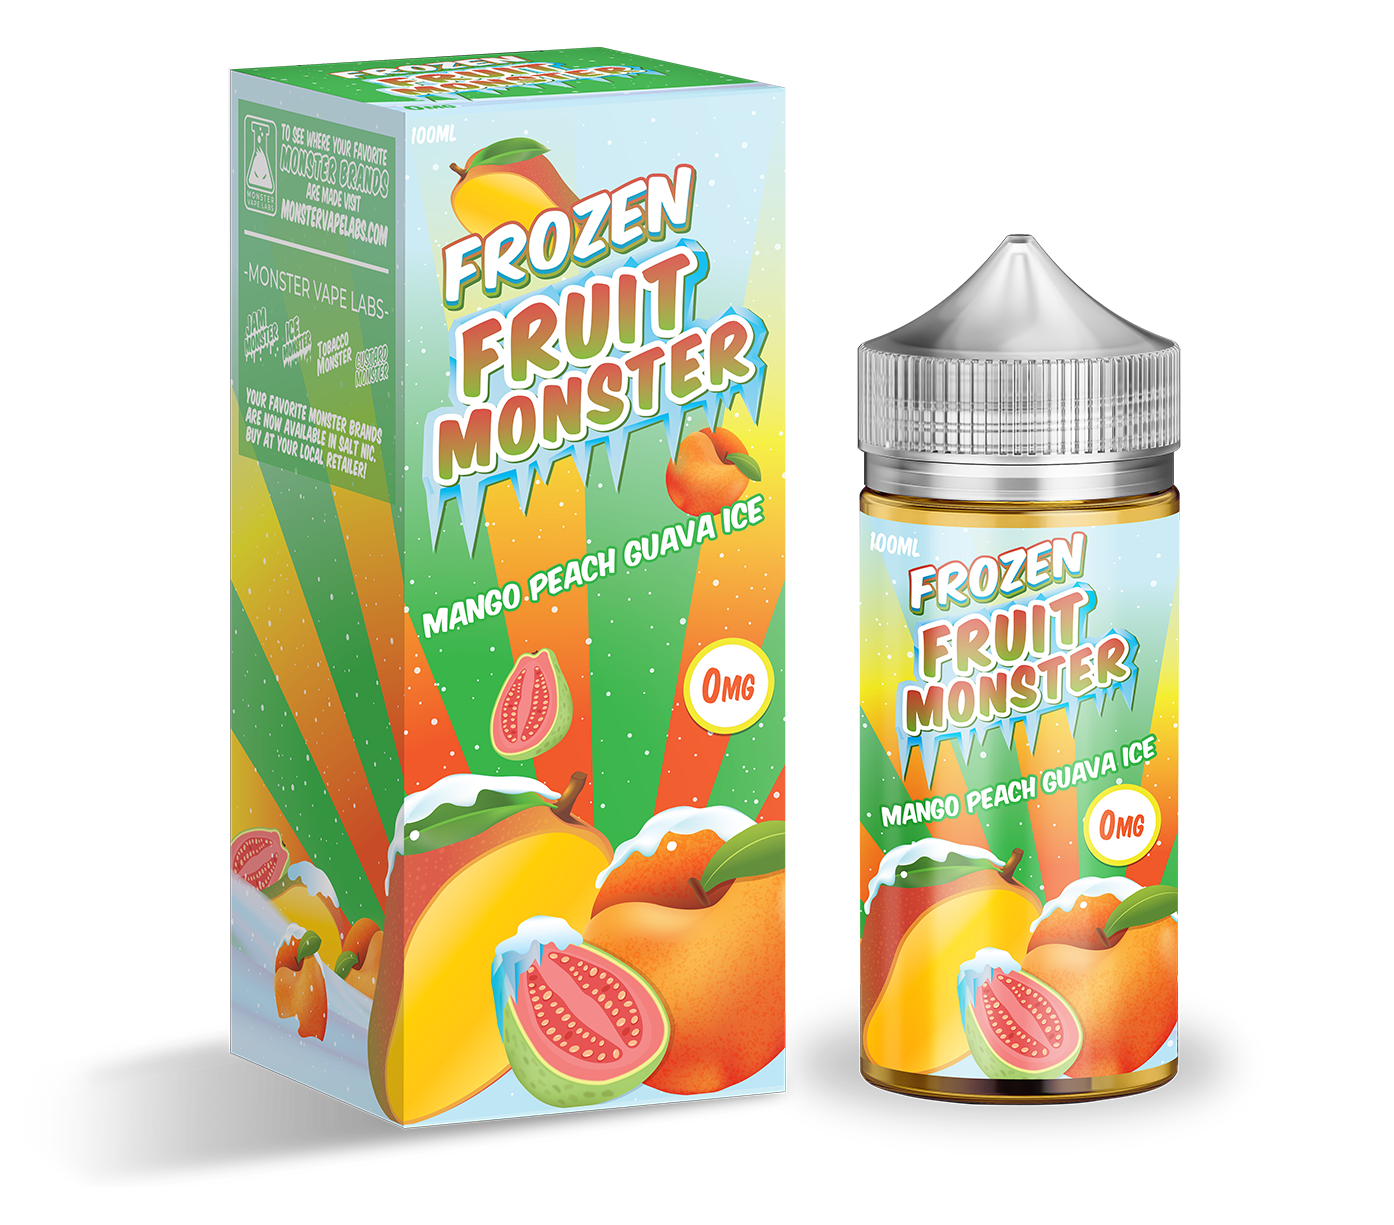 Mango Peach Guava Ice by Fruit Monster Frozen Collection